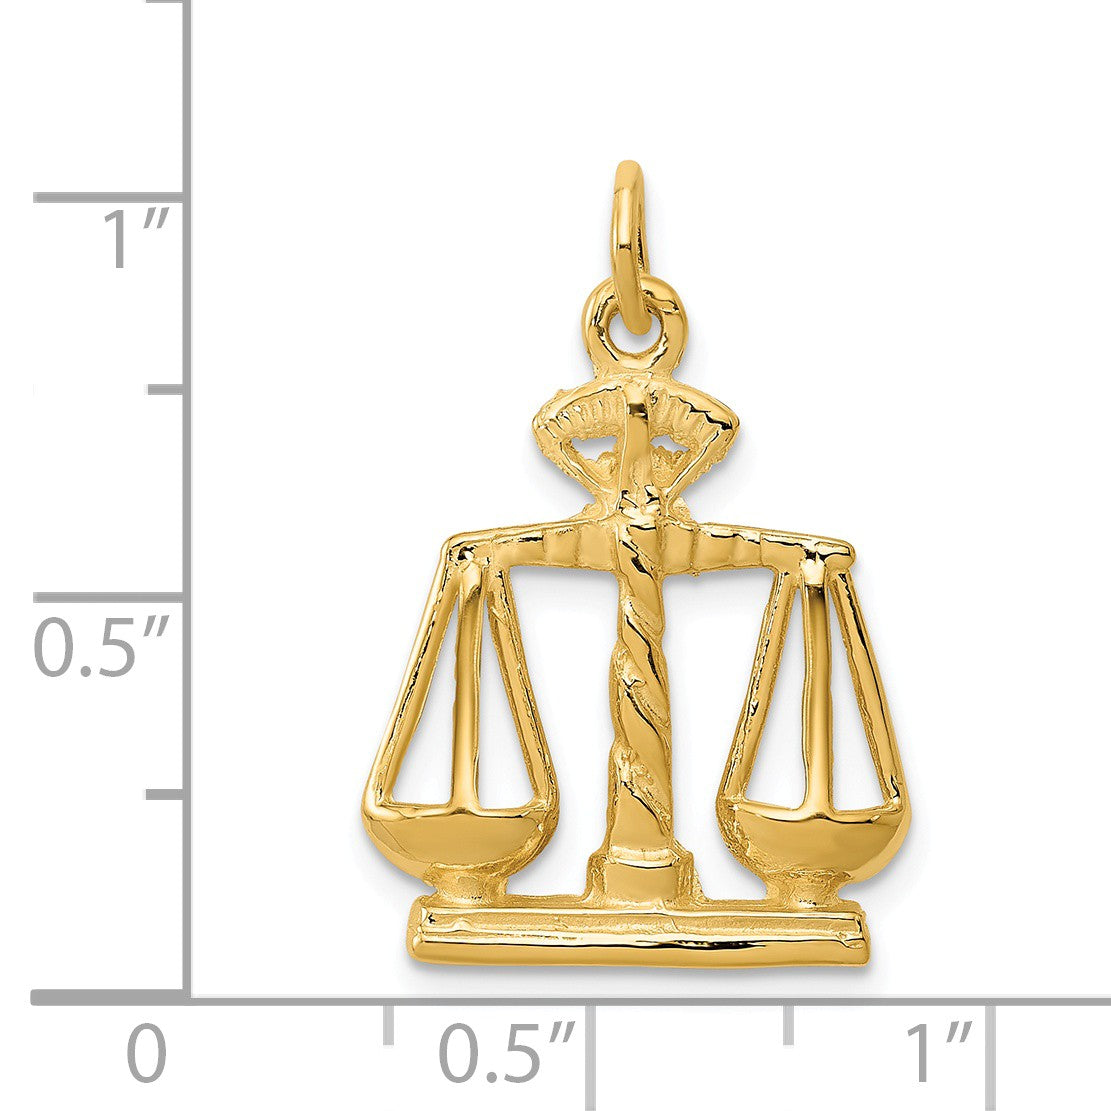 Alternate view of the 14k Yellow Gold Scales of Justice Charm by The Black Bow Jewelry Co.